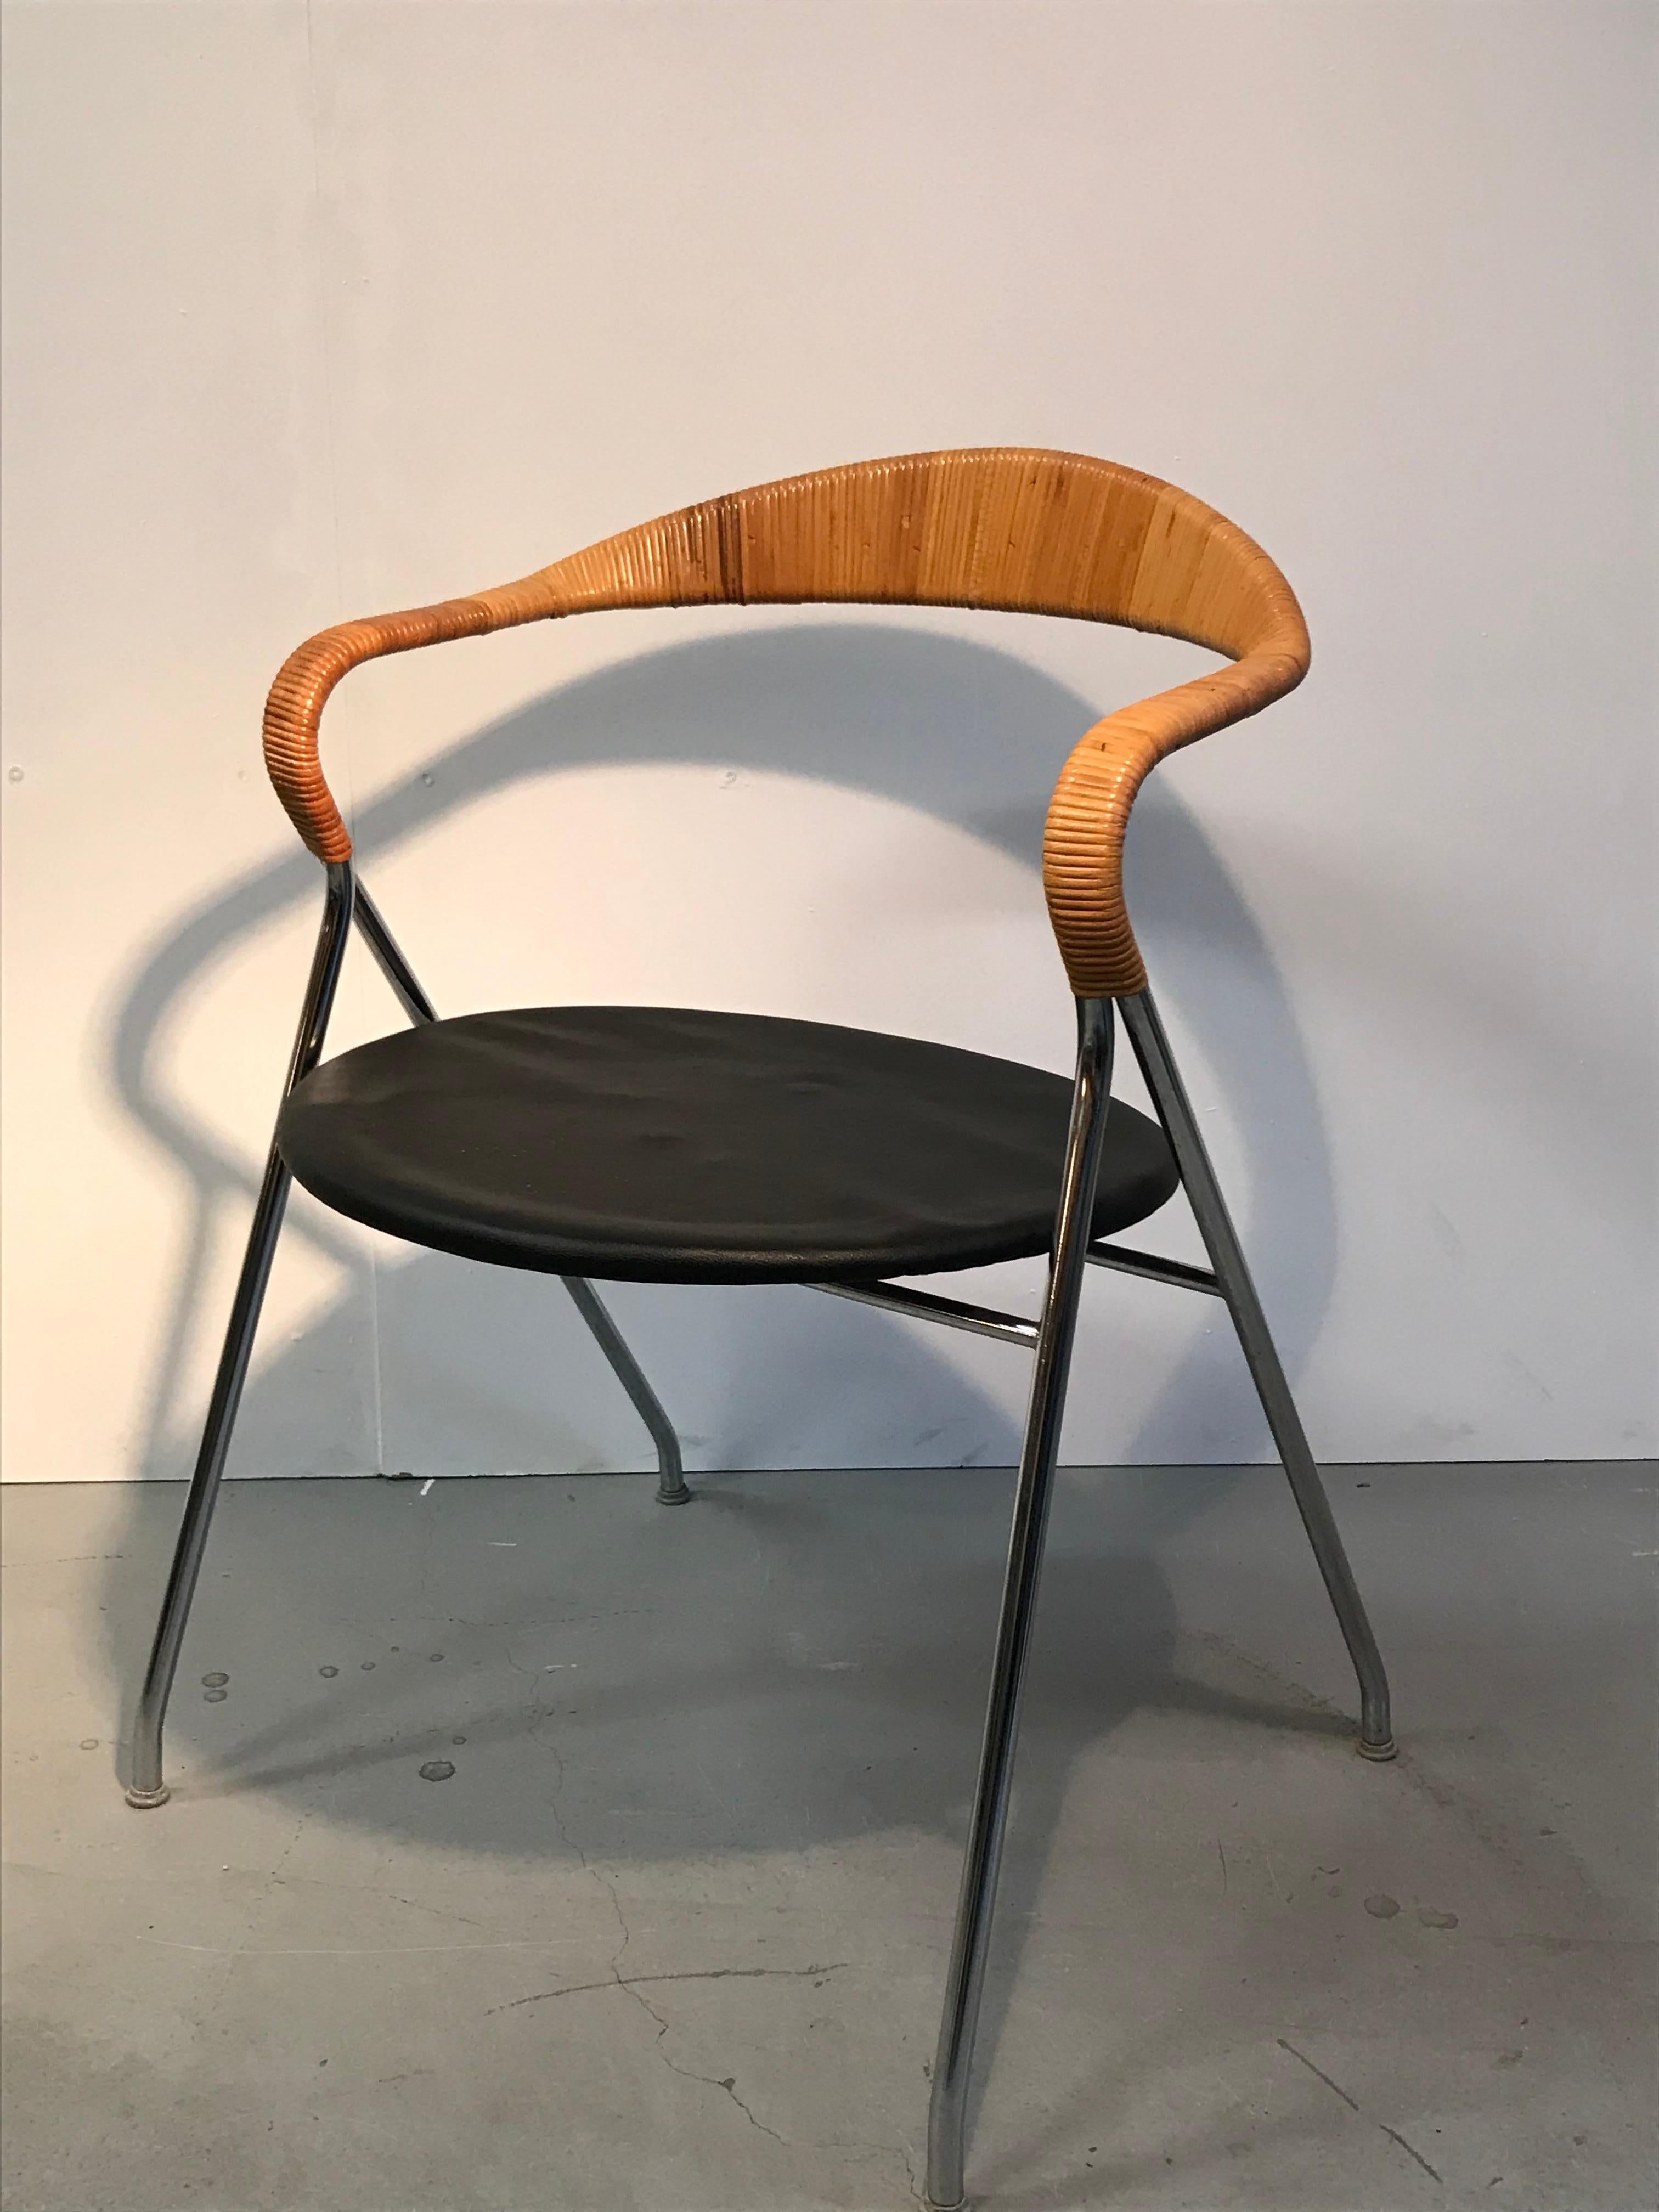 4 chairs available from Hans Eichenberger,Switzerland born 1926. 
The chairs,Saffa HE 103 are made for Dietiker,Switzerland in 1955. 

Legs from chromed tubular steel with leather seating and rattan backrest.The design may be minimalistic,but